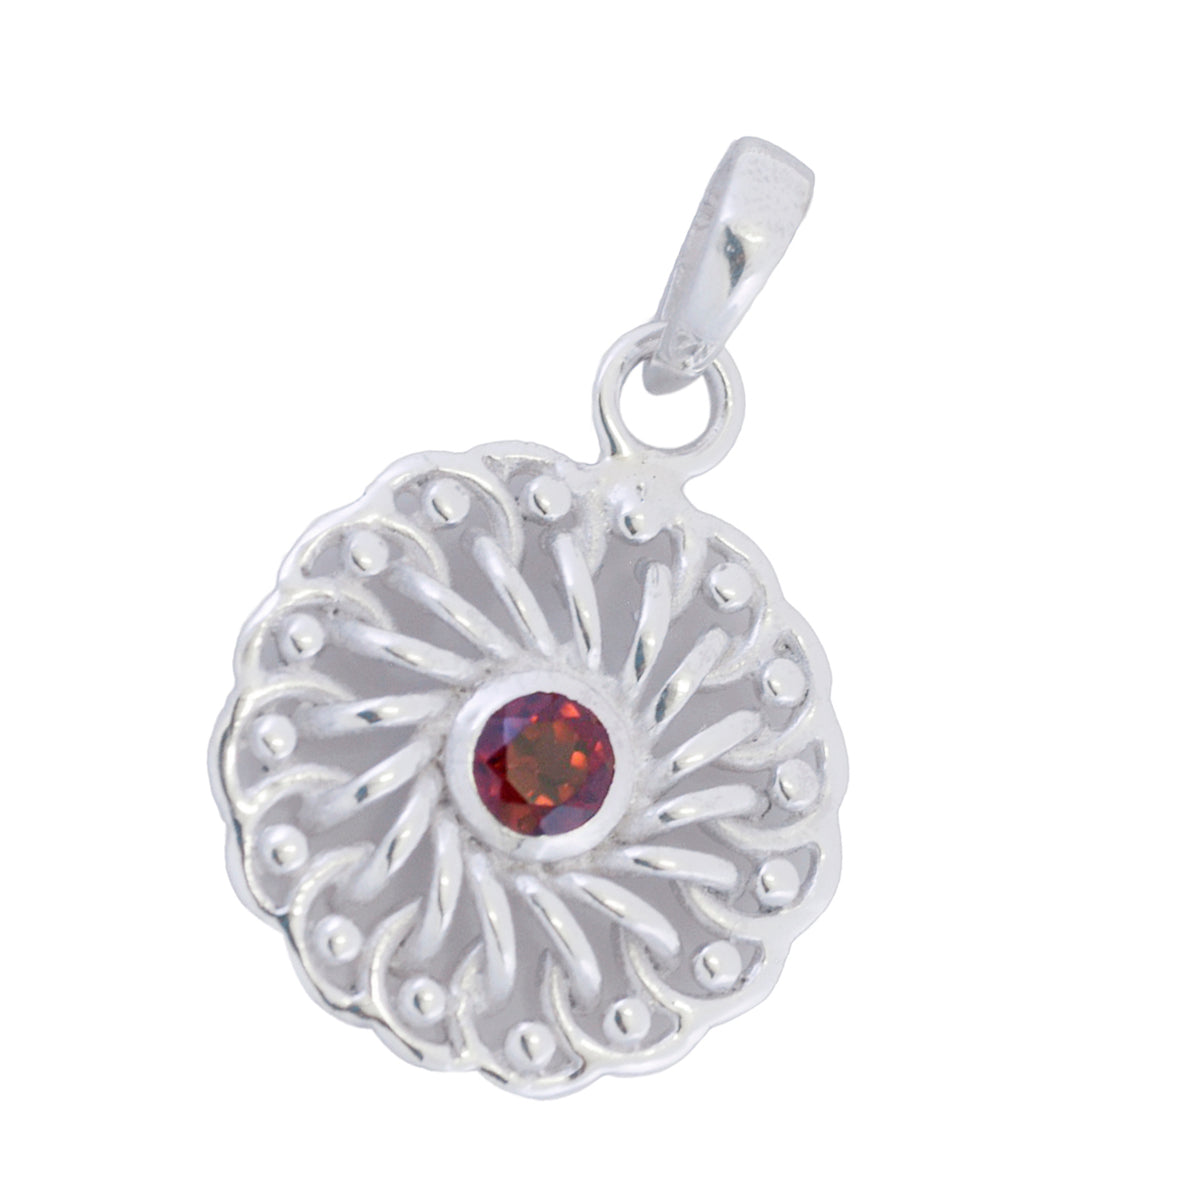 Riyo Beddable Gemstone Round Faceted Red Garnet Sterling Silver Pendant Gift For Friend